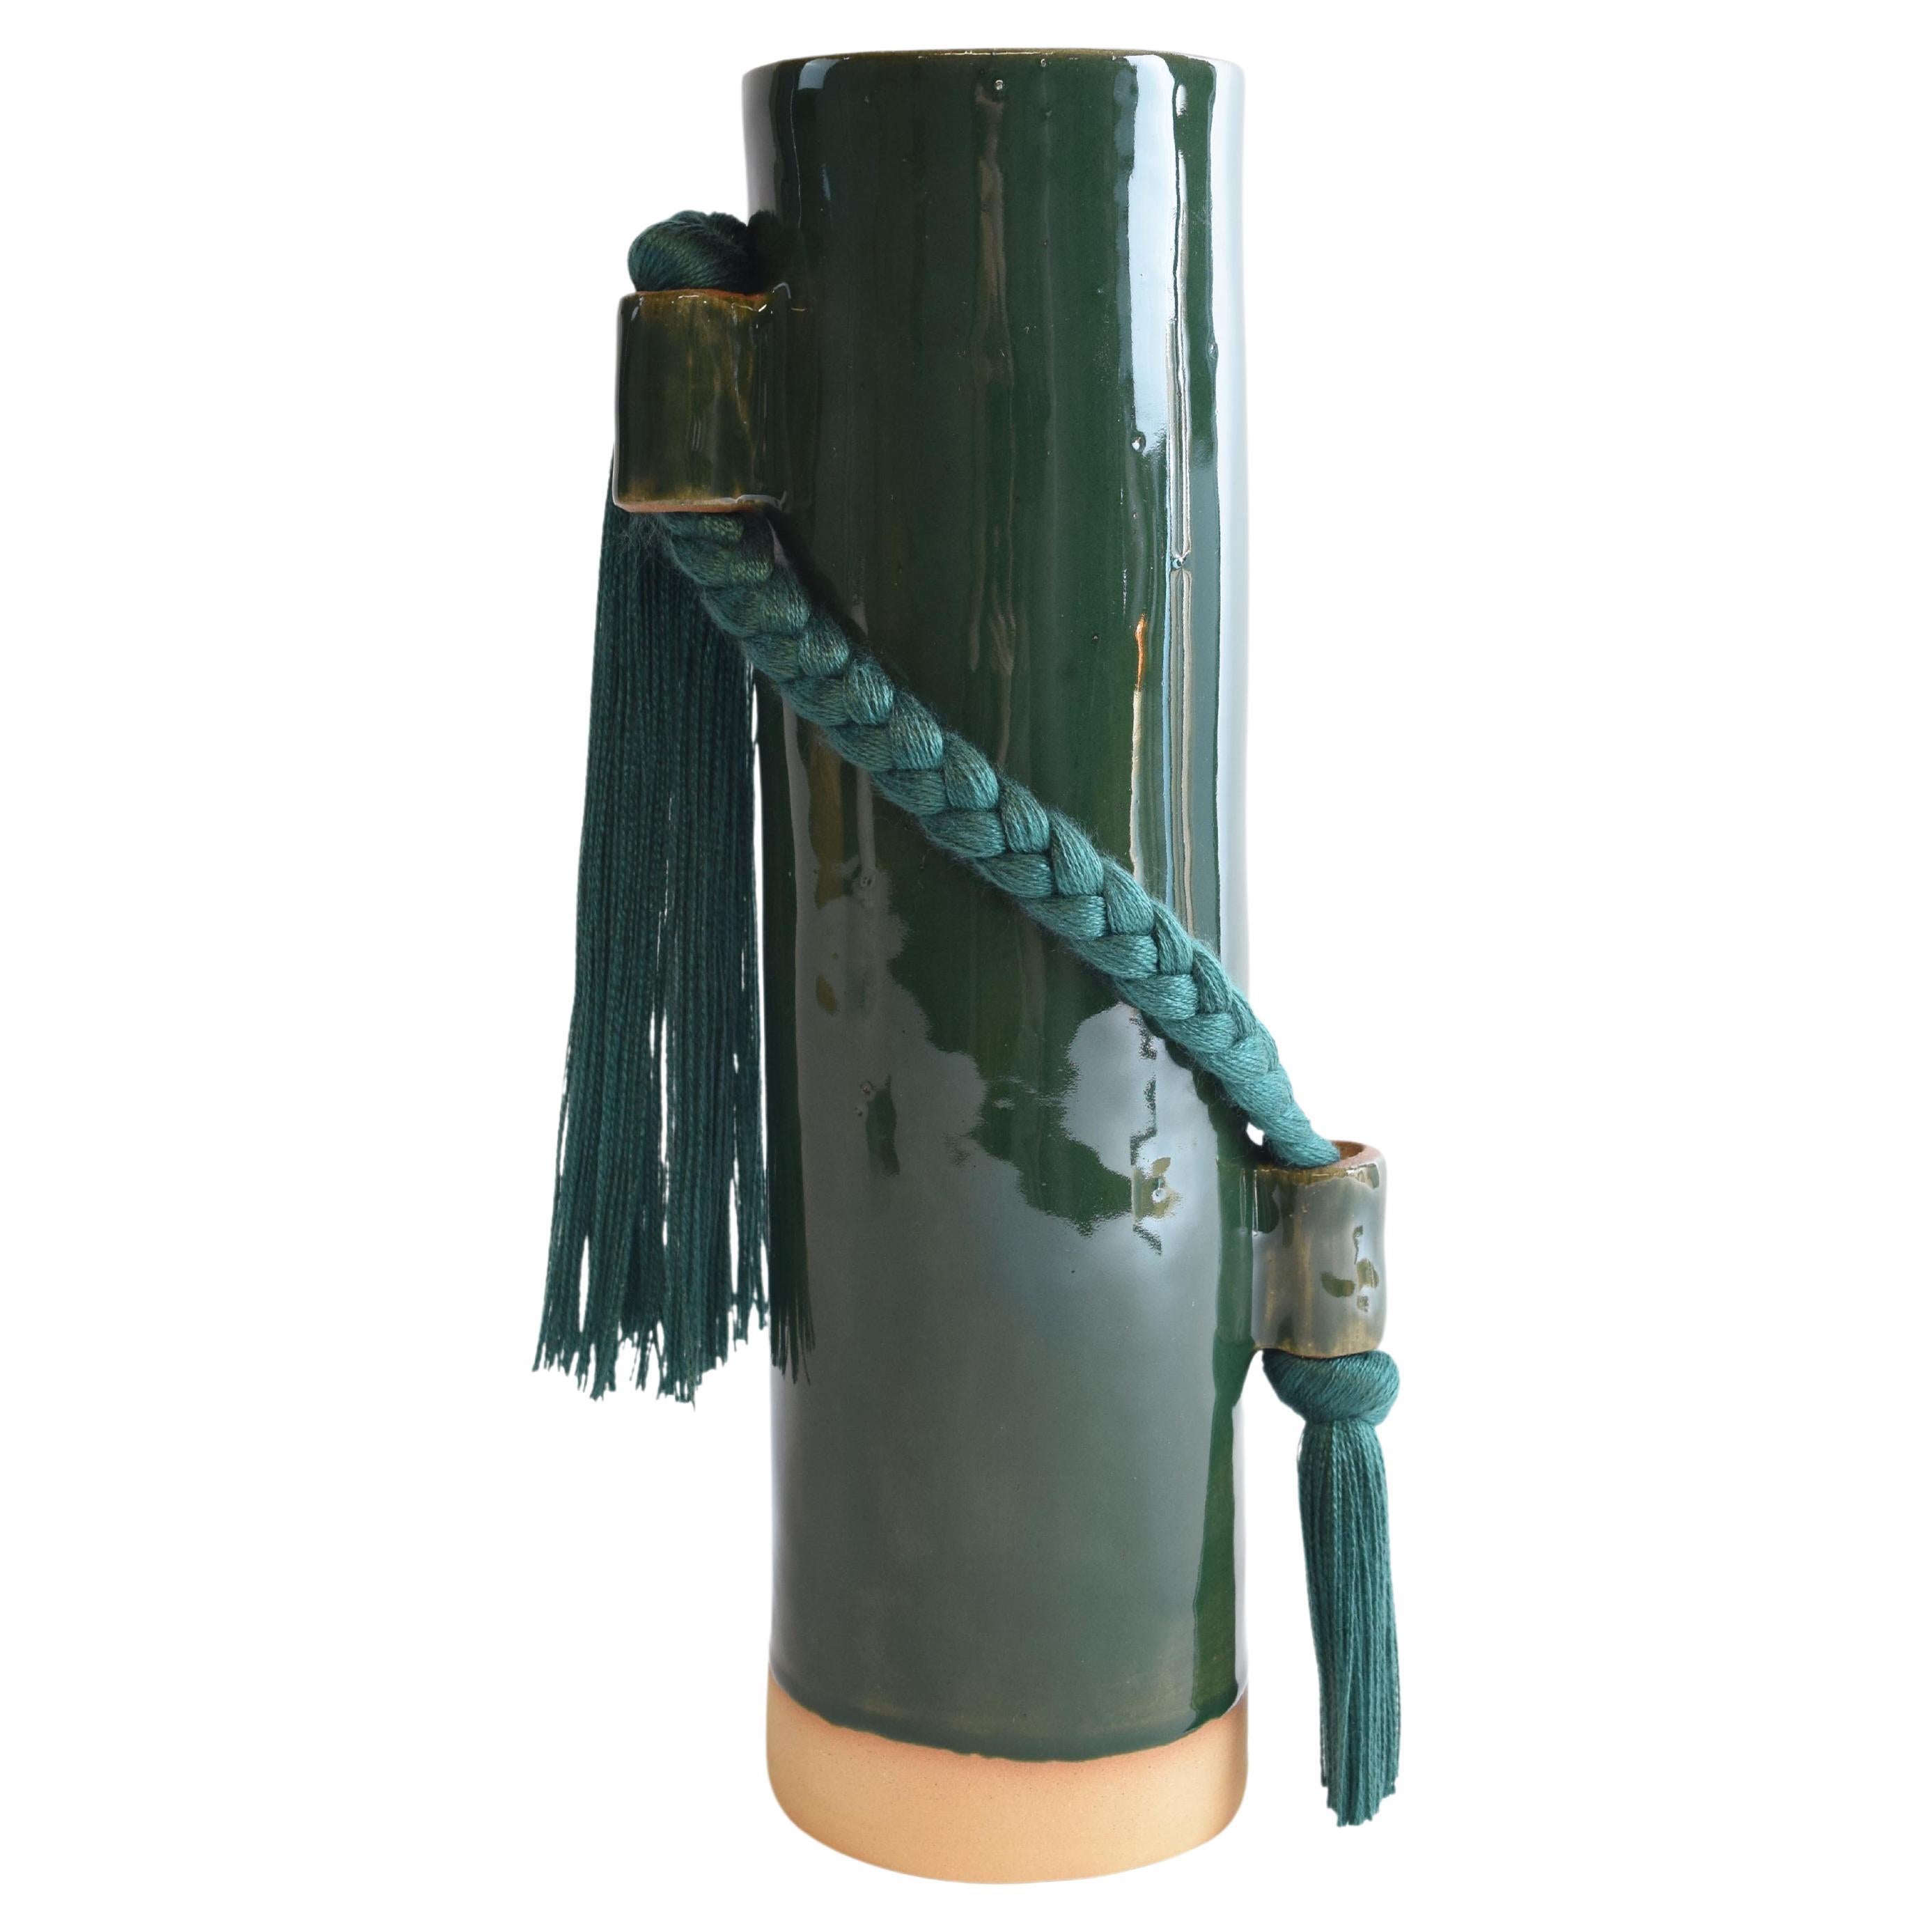 Handmade Ceramic Vase #695 in Dark Green with Green Tencel Braid and Fringe For Sale